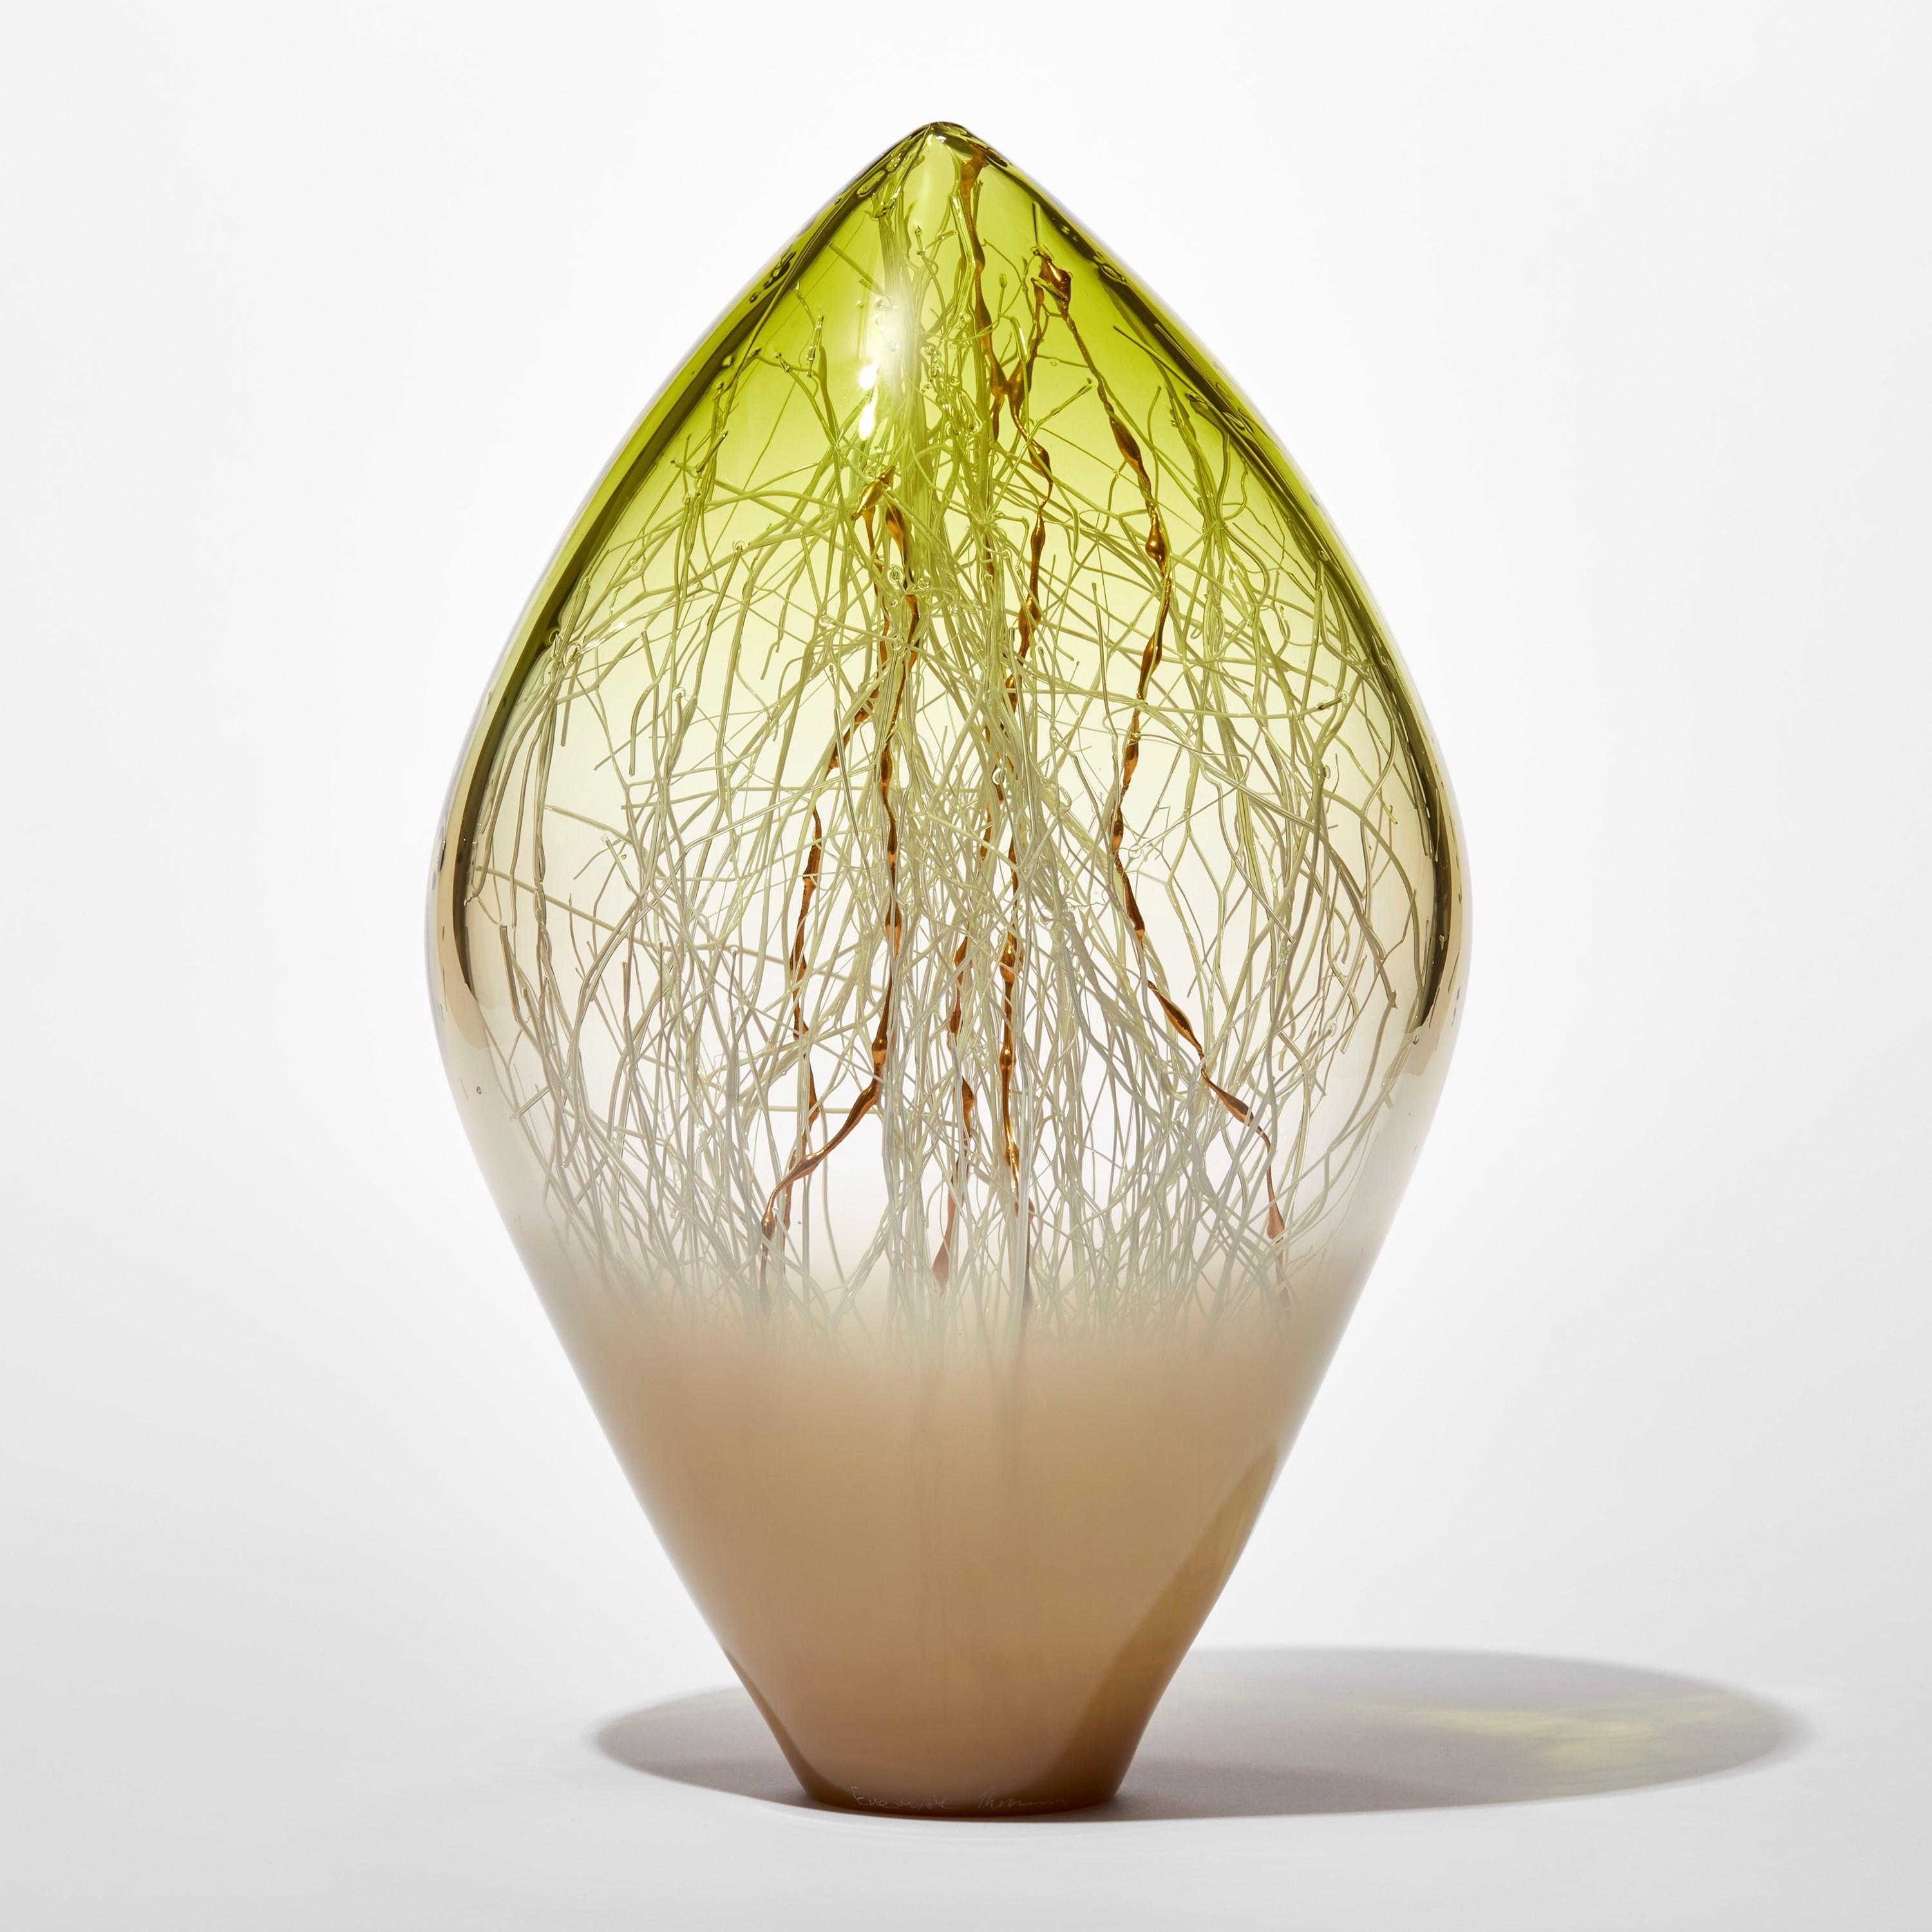 'Elixir in Weimaraner and Olive Green' is a unique handblown and sculpted glass artwork by the Danish and British artists, Hanne Enemark & Louis Thompson.

The outer glass form contains a multitude of fine white canes of glass, some of which have